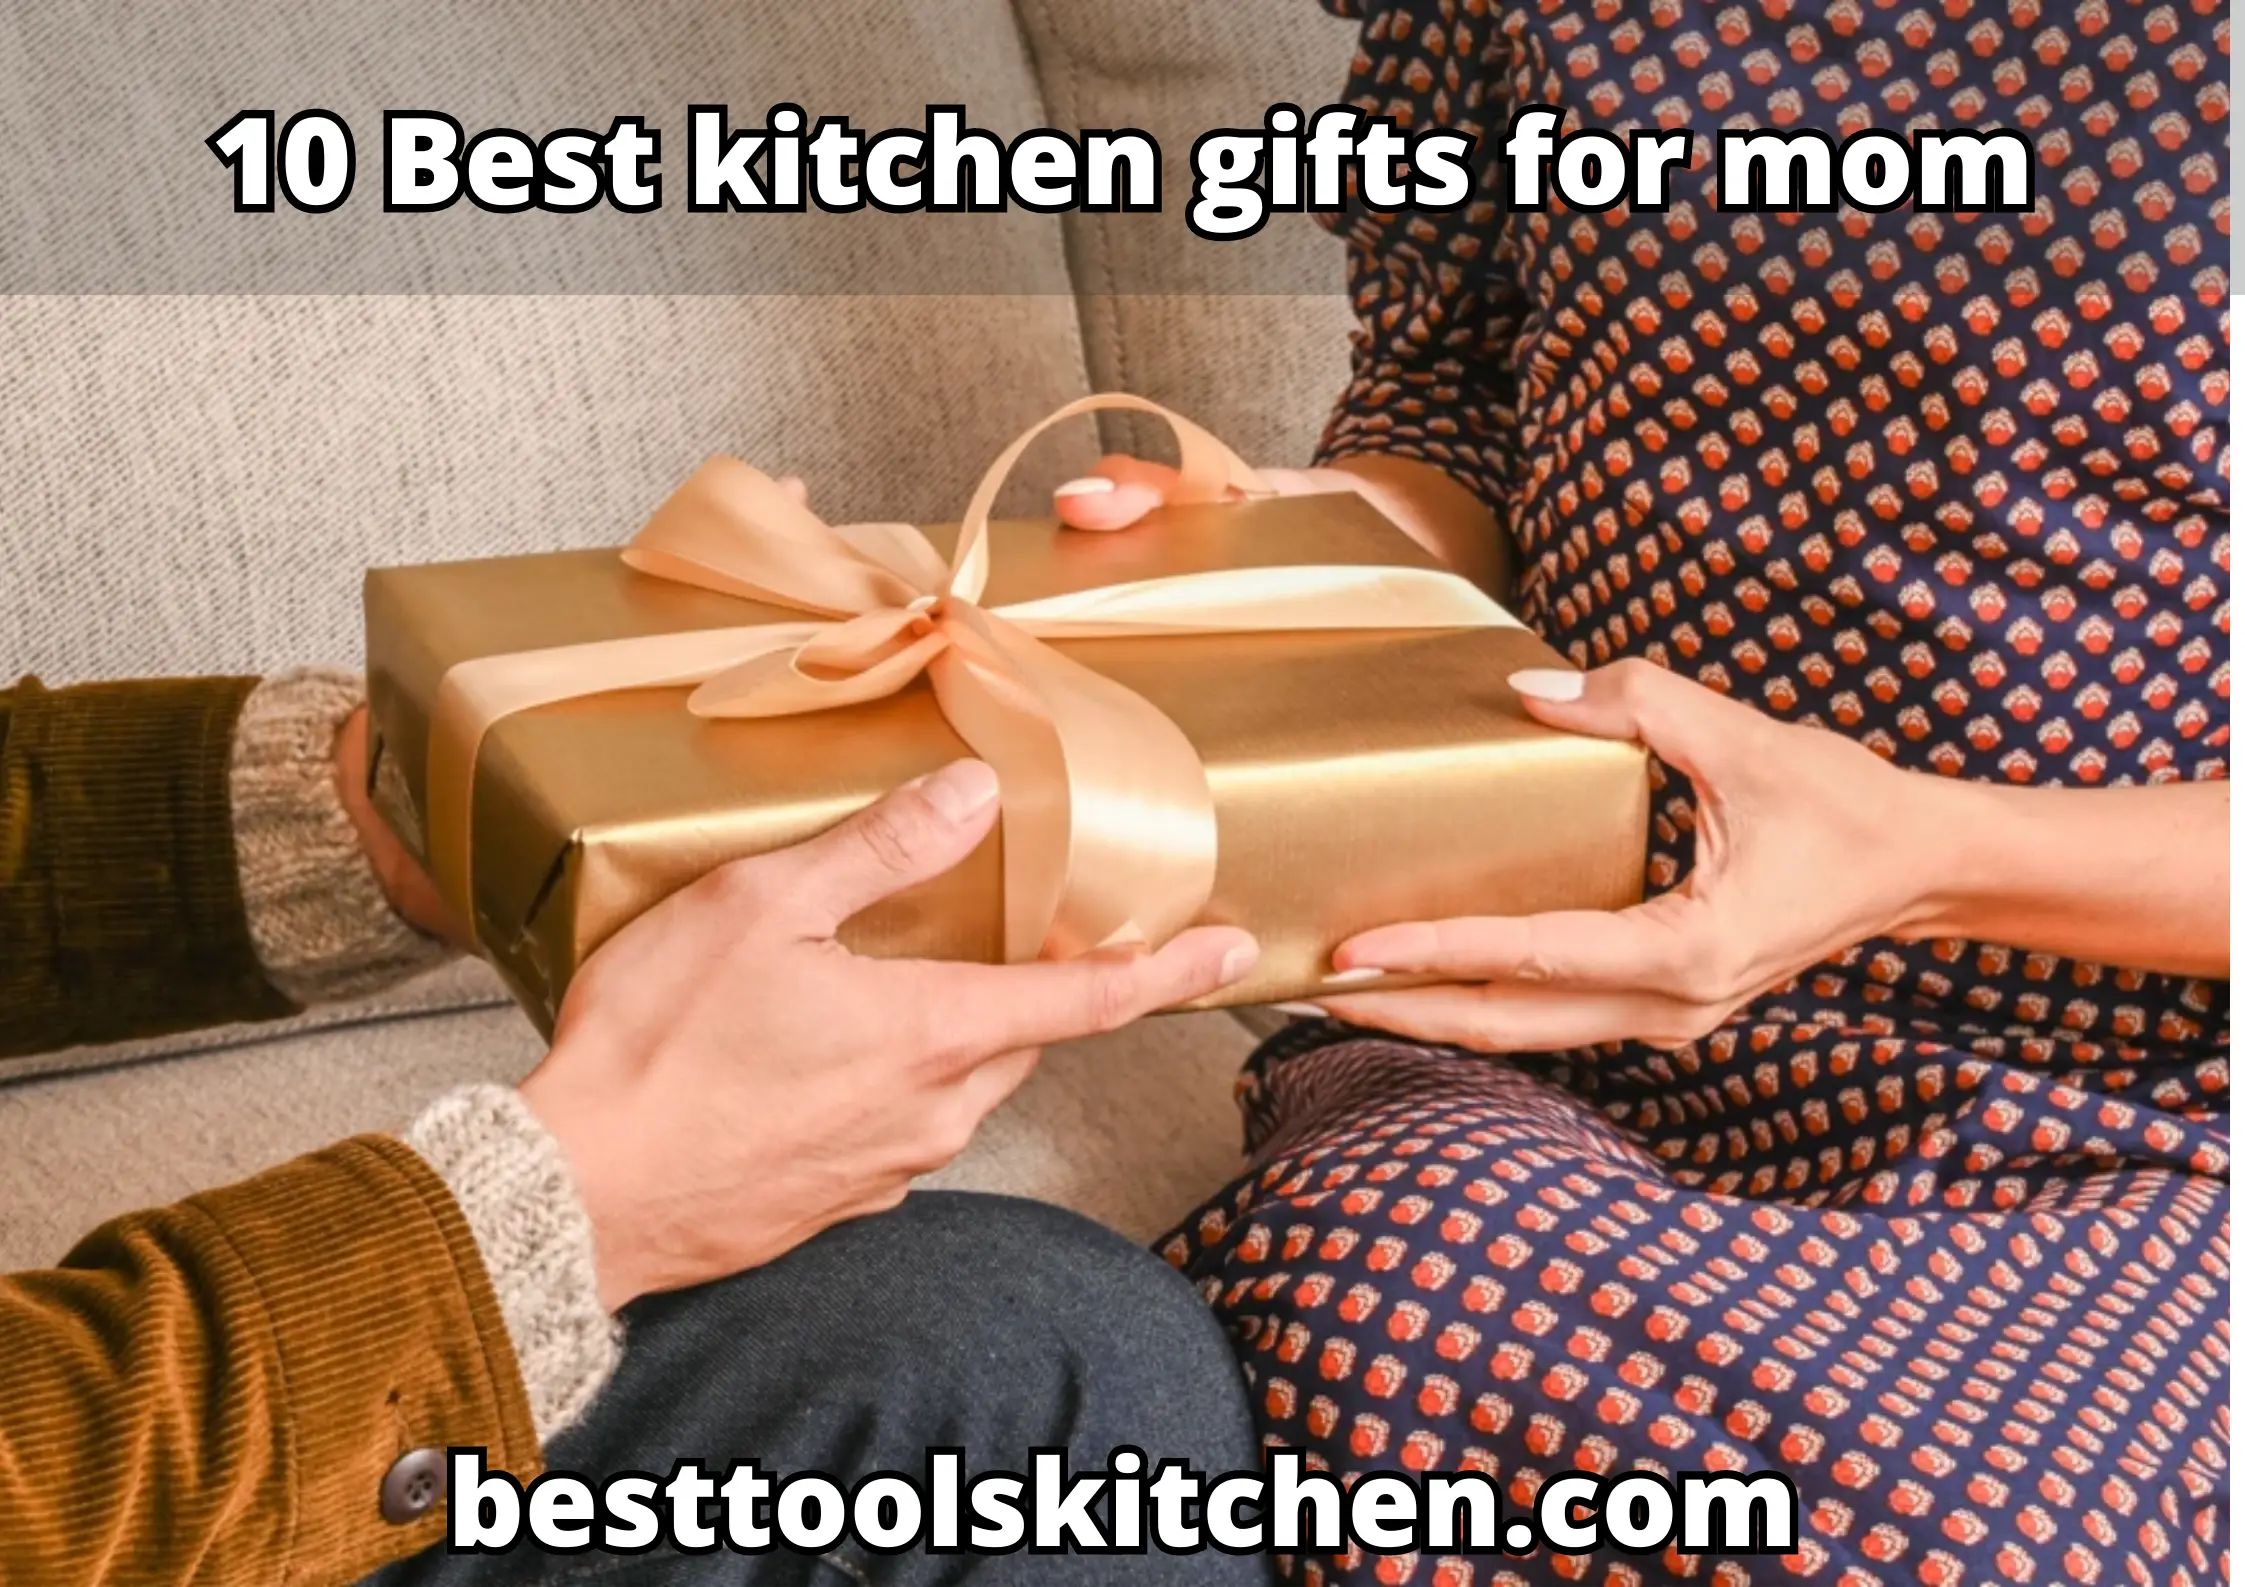 Best kitchen gifts For mom